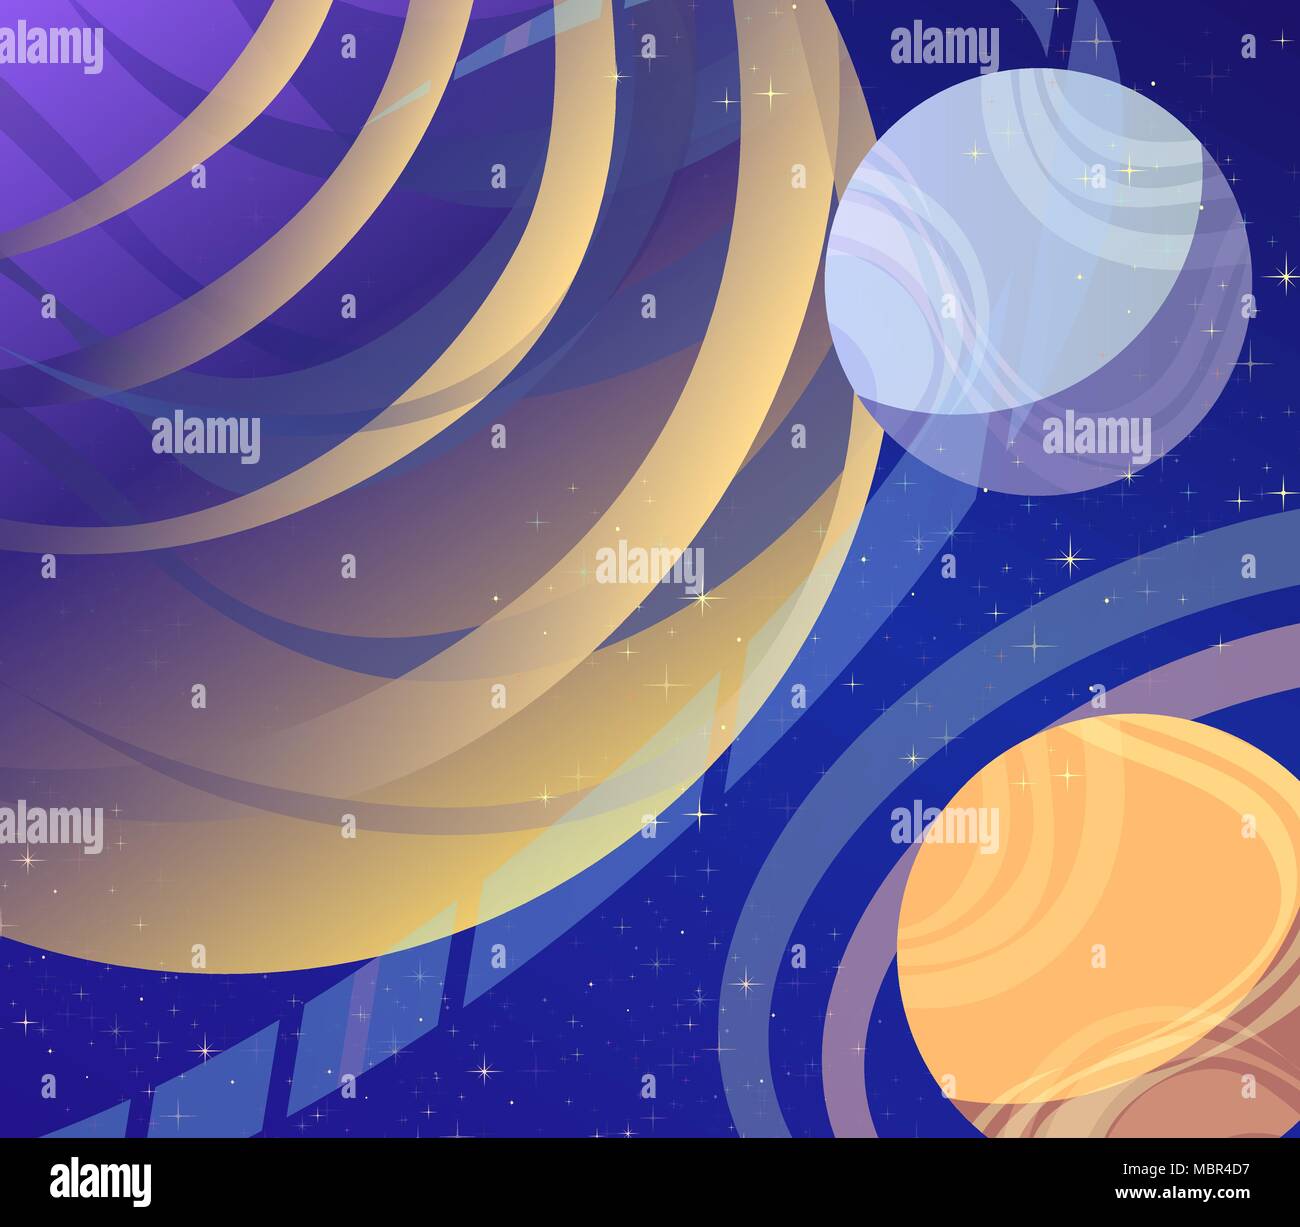 Cosmos, futuristic vector art of fantasy of the future. Space, stars, planets overcoming space, interplanetary flights. Stock Vector